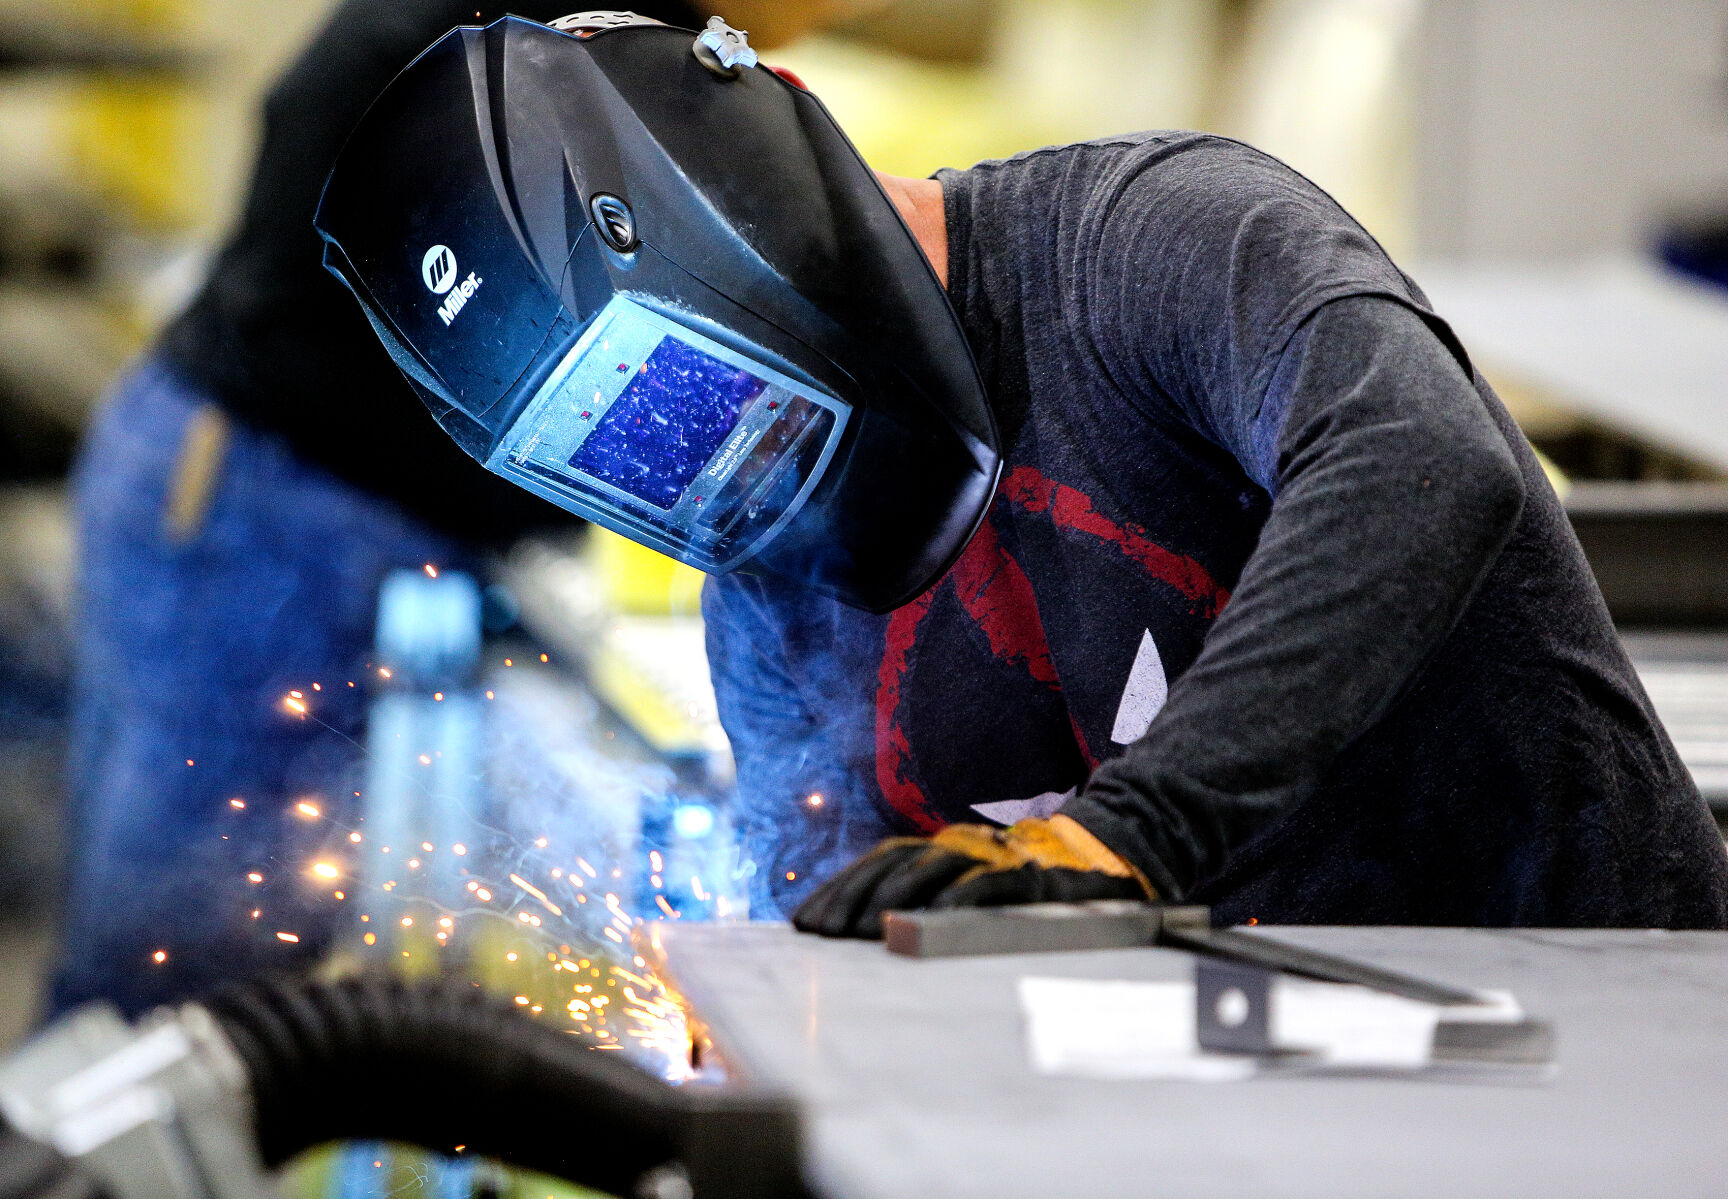 Modernfold employee Chris Phillips welds a product.    PHOTO CREDIT: Dave Kettering Telegraph Herald